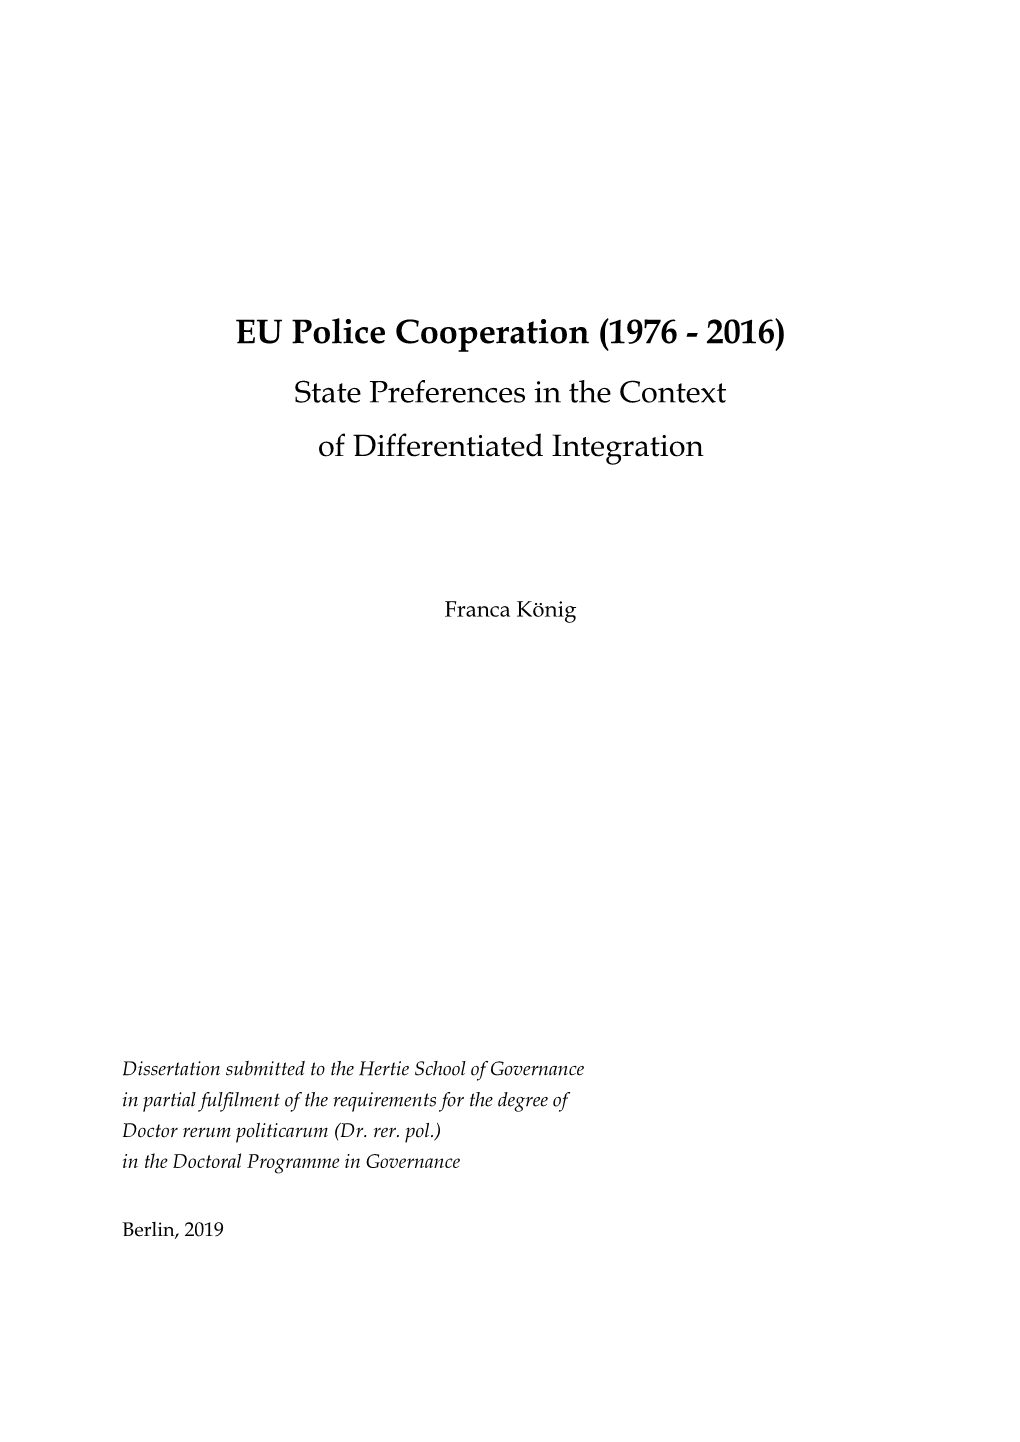 EU Police Cooperation (1976 - 2016) State Preferences in the Context of Differentiated Integration